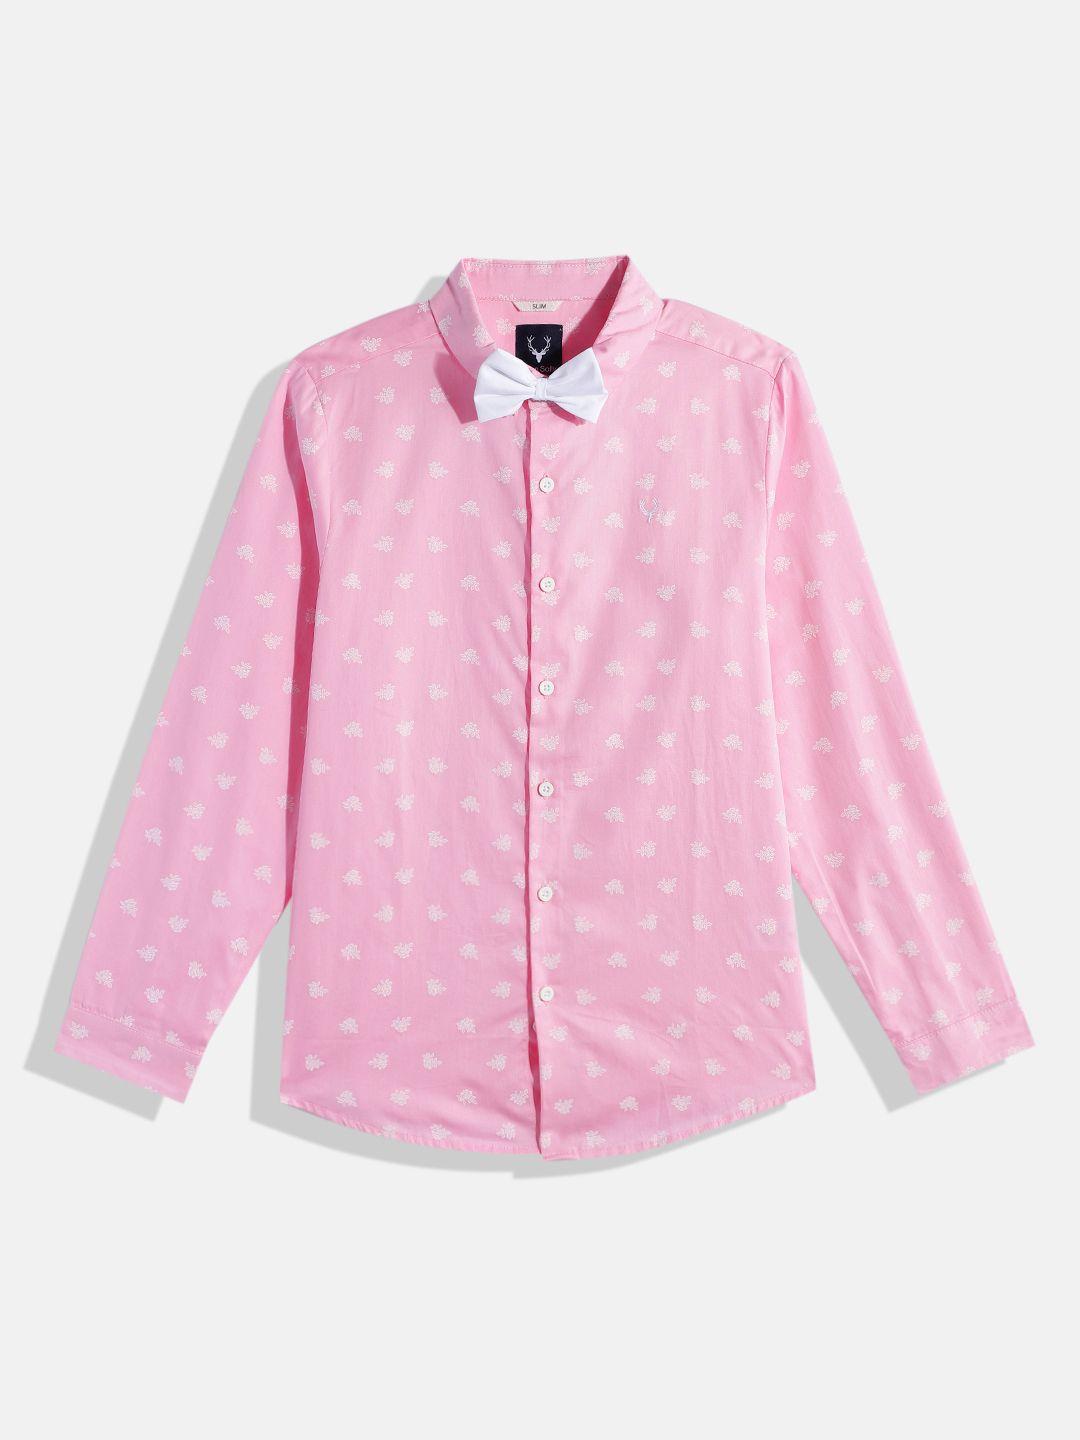 allen-solly-junior-boys-slim-fit-floral-opaque-printed-pure-cotton-casual-shirt-with-a-bow